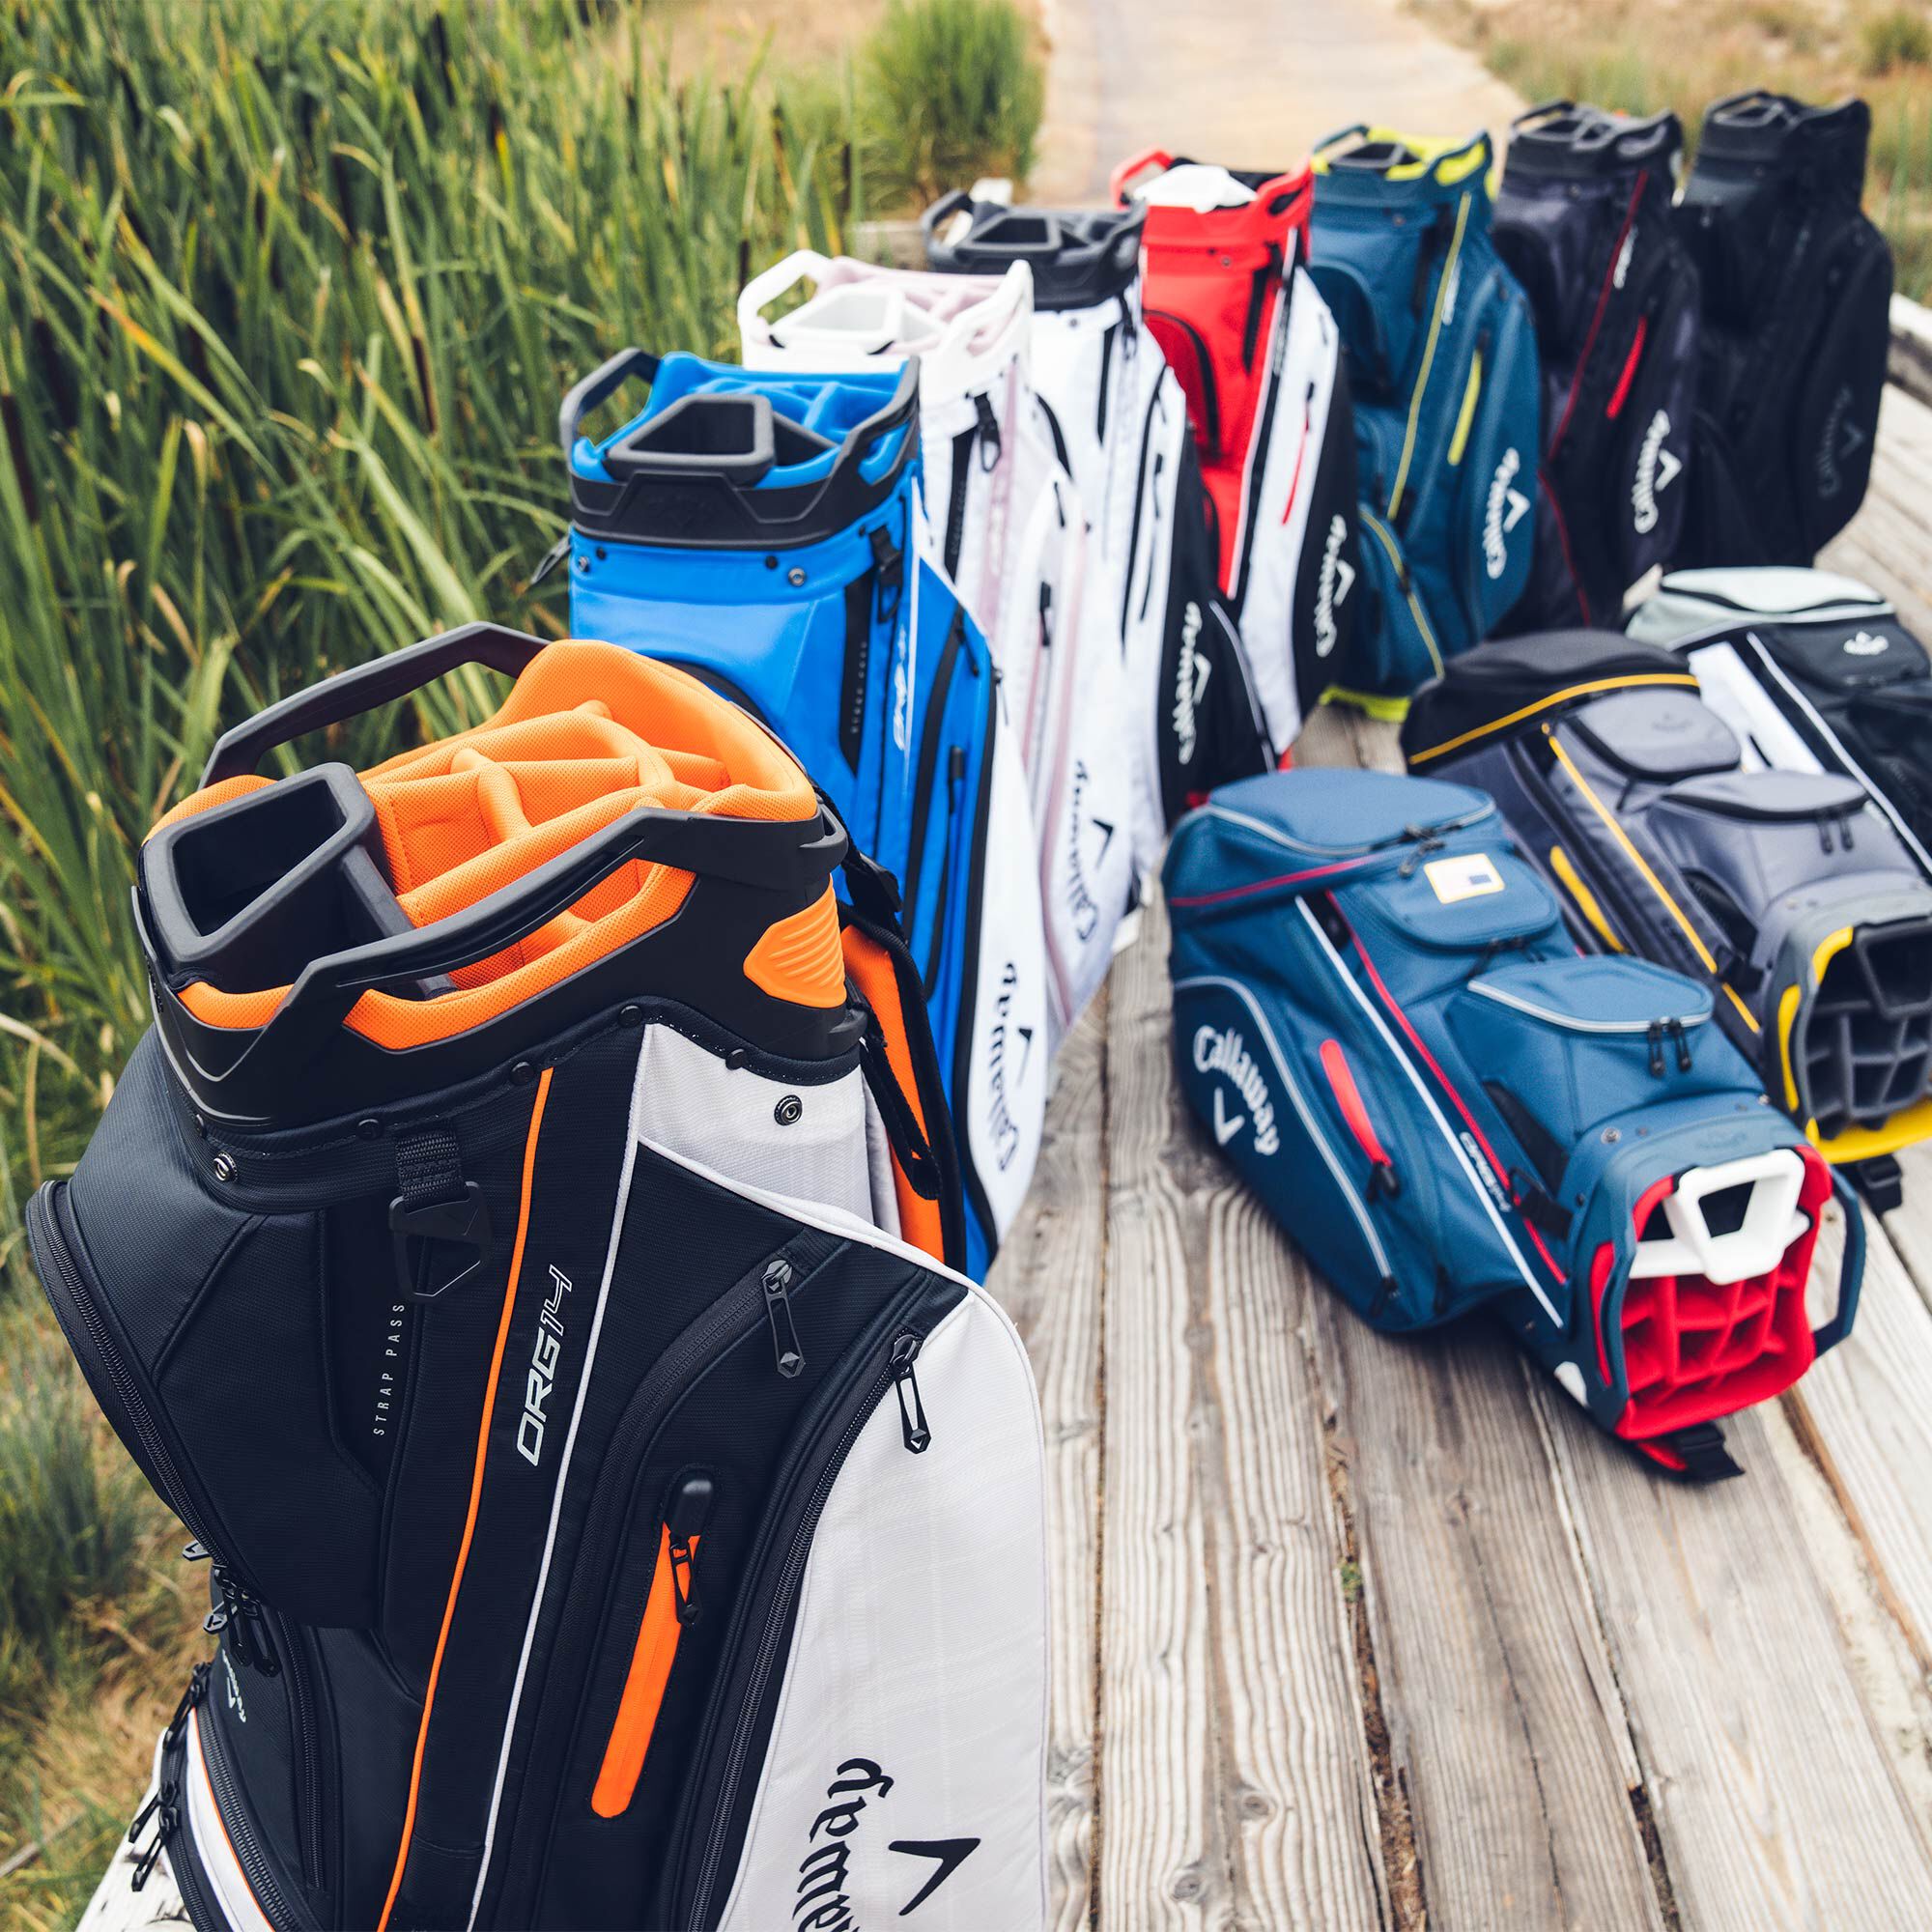 Golf Bags for Sale  Largest Range  FREE Shipping  GolfBox